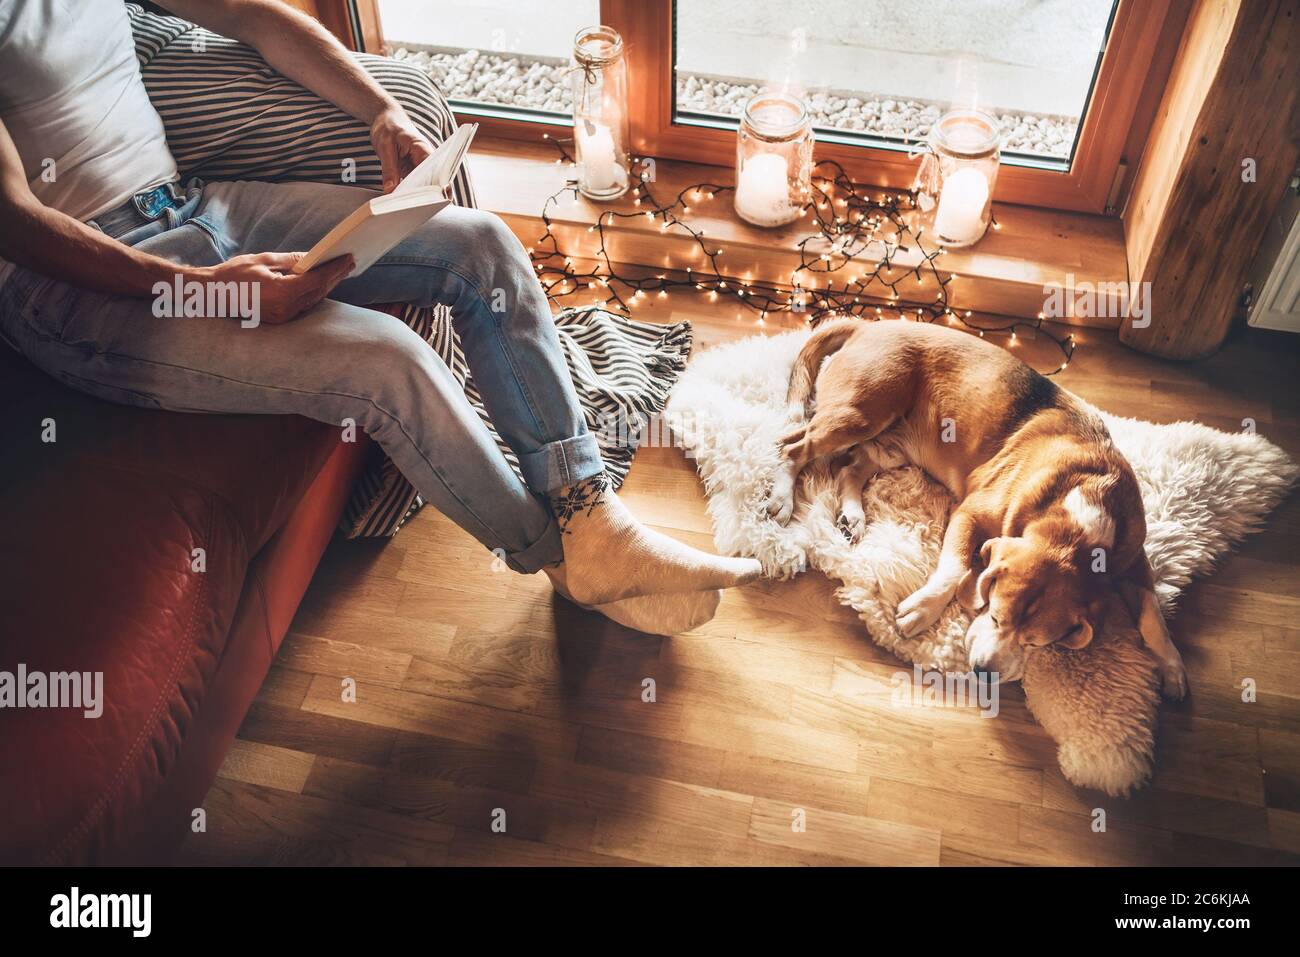 Man reading book on the cozy couch near slipping his beagle dog on sheepskin in cozy home atmosphere. Peaceful moments of cozy home concept image. Stock Photo